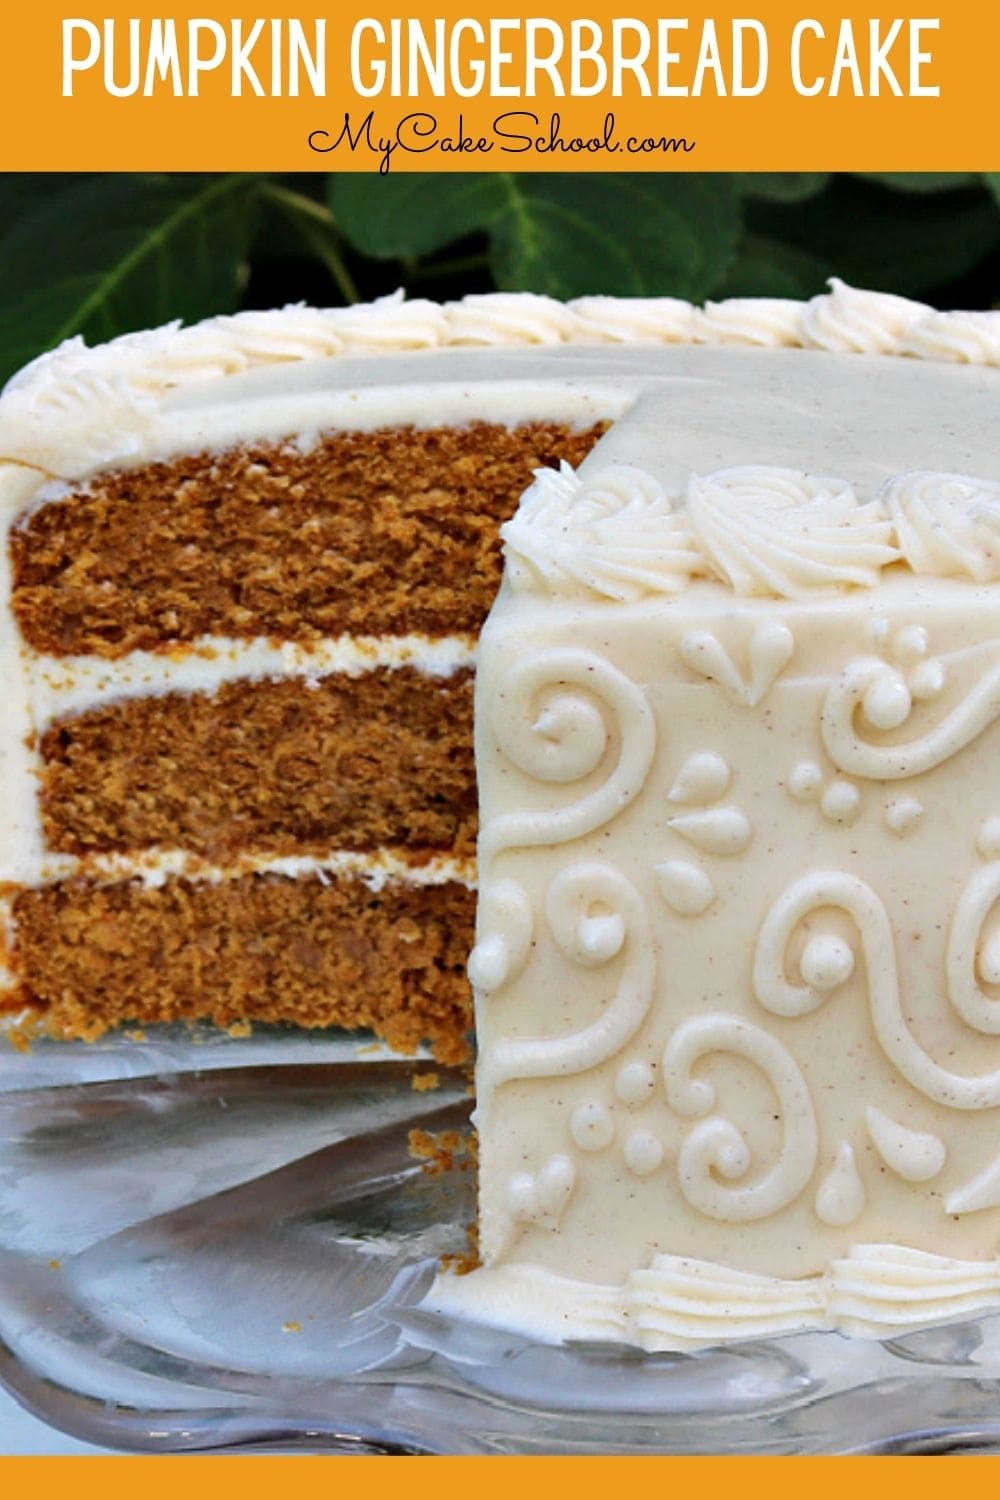 This moist Pumpkin Gingerbread Cake is so flavorful!